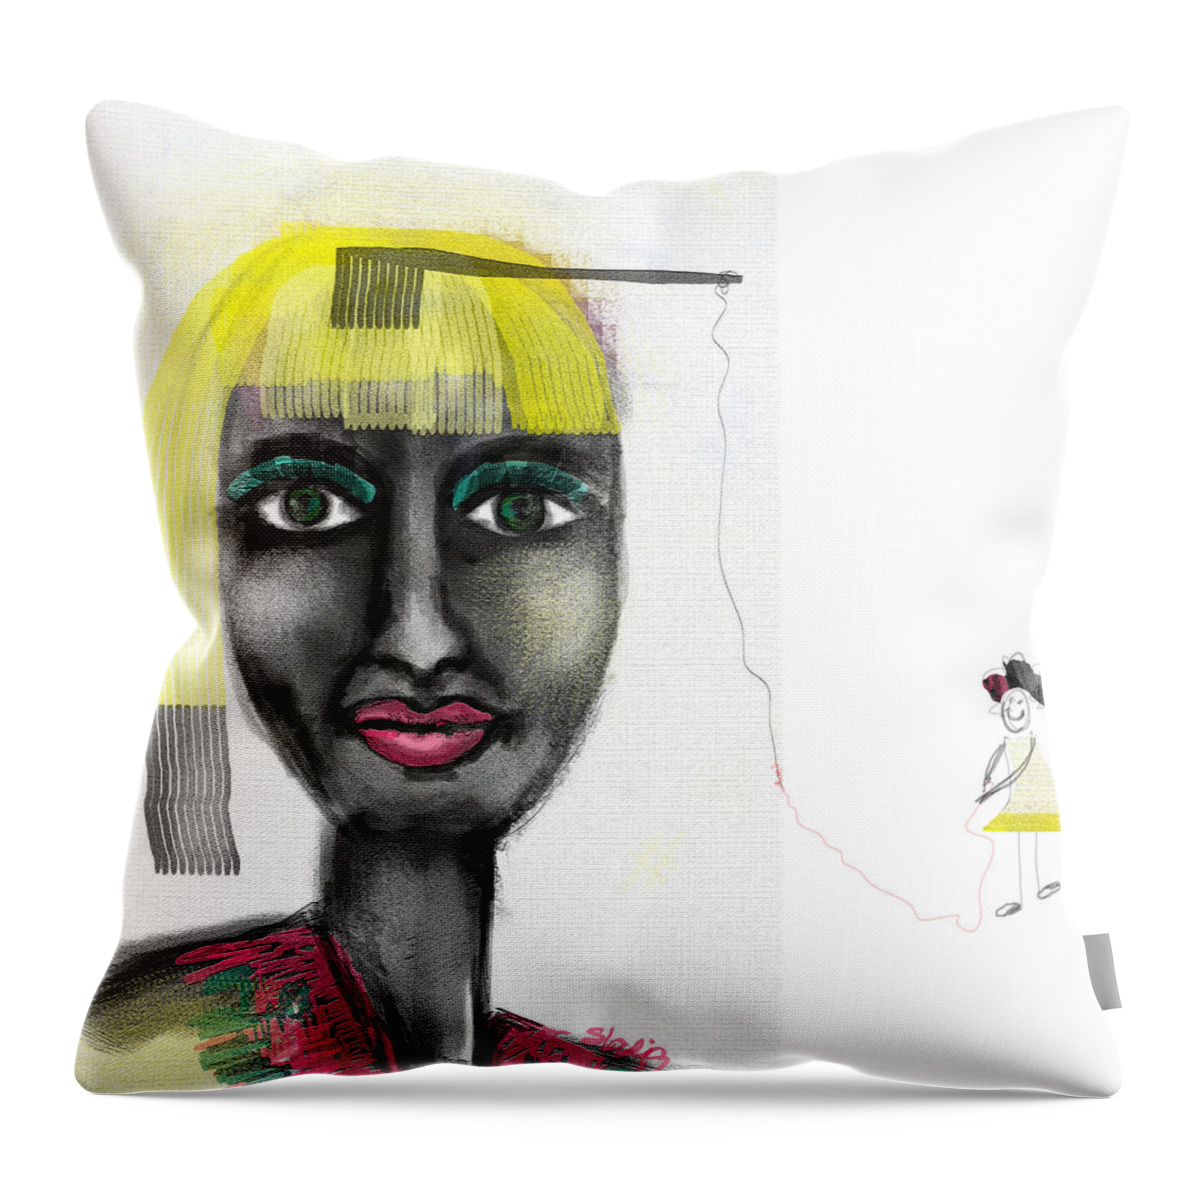 Makeover Throw Pillow featuring the digital art Makeover by Sladjana Lazarevic